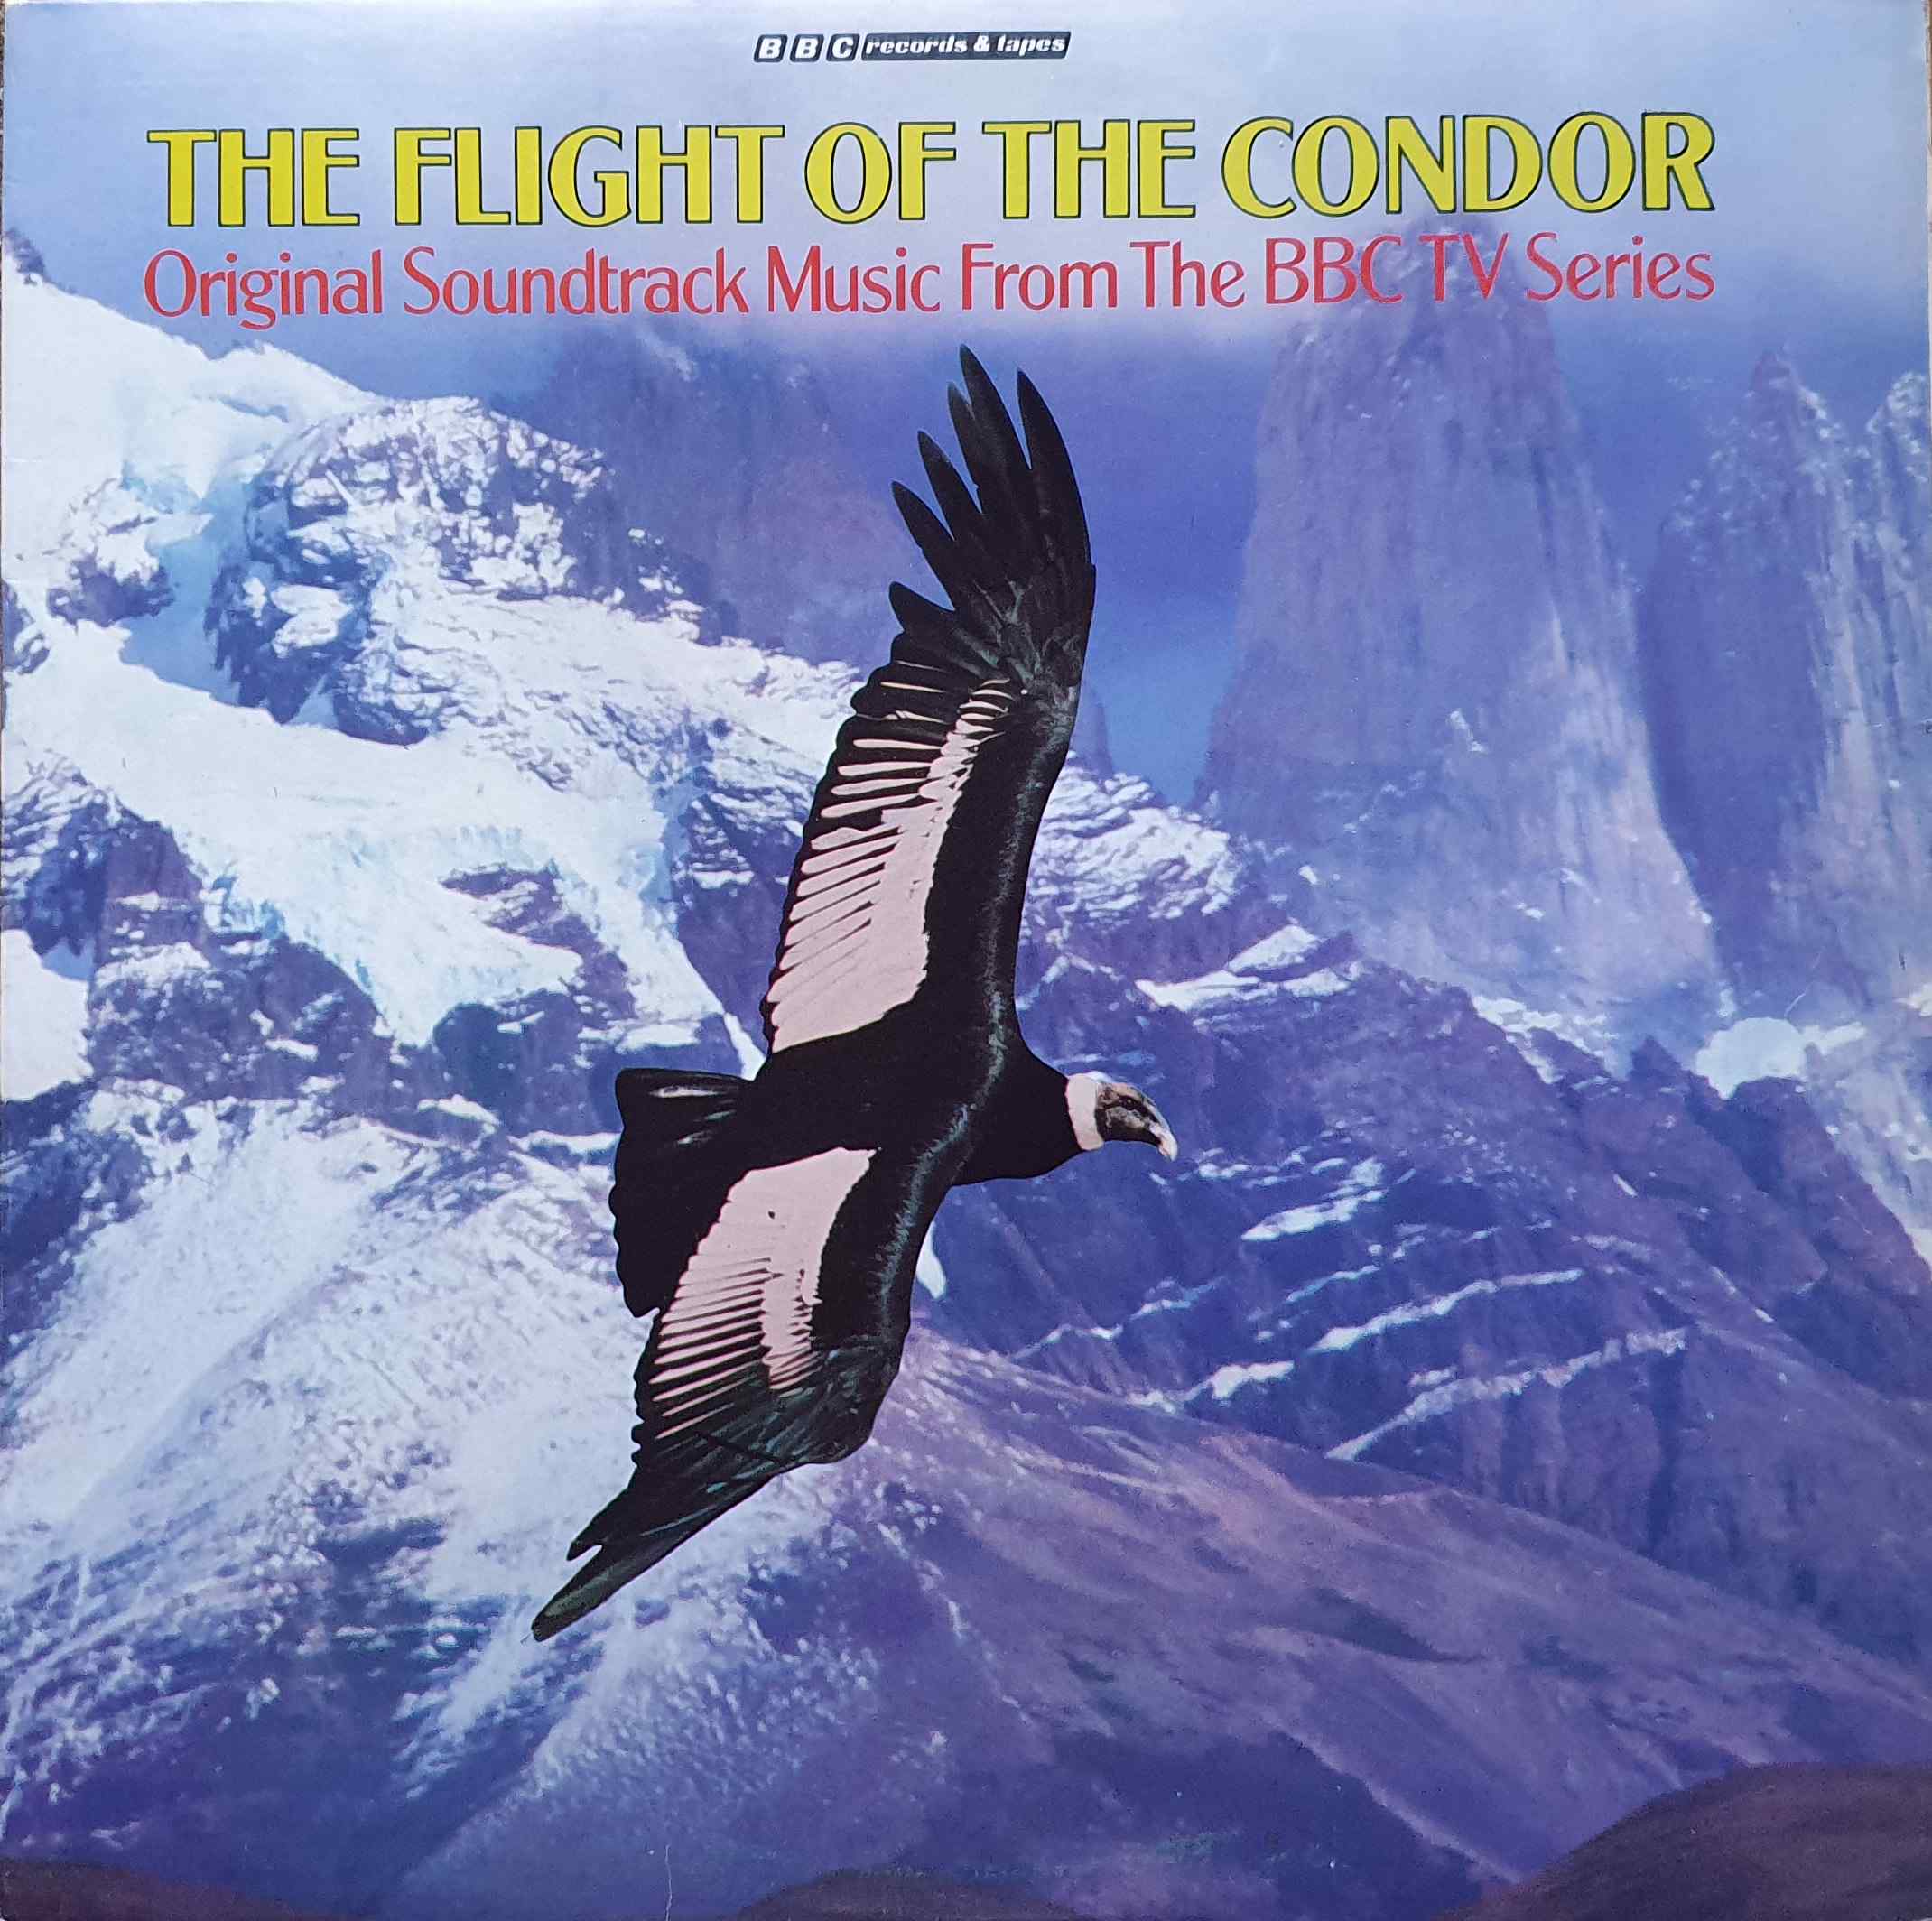 Picture of BBC - 22440 The flight of the condor (US import - with poster) by artist Various from the BBC albums - Records and Tapes library